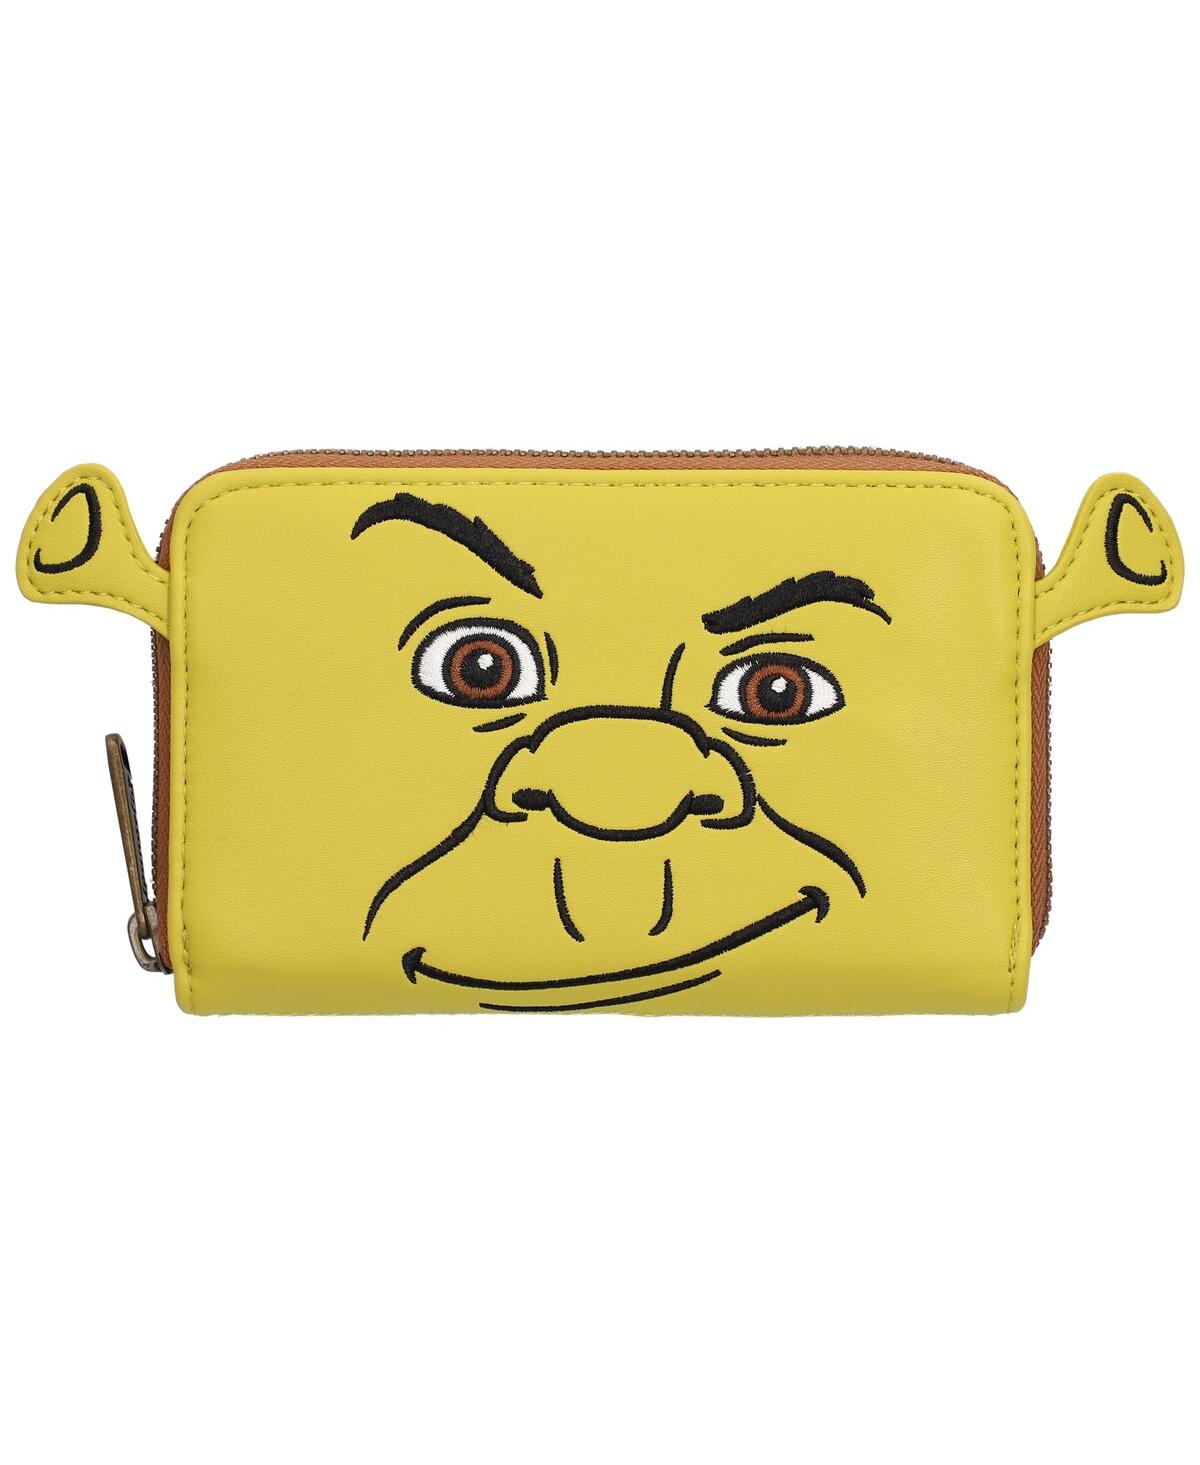 Loungefly Shrek Keep Out Zip-around Wallet In No Color